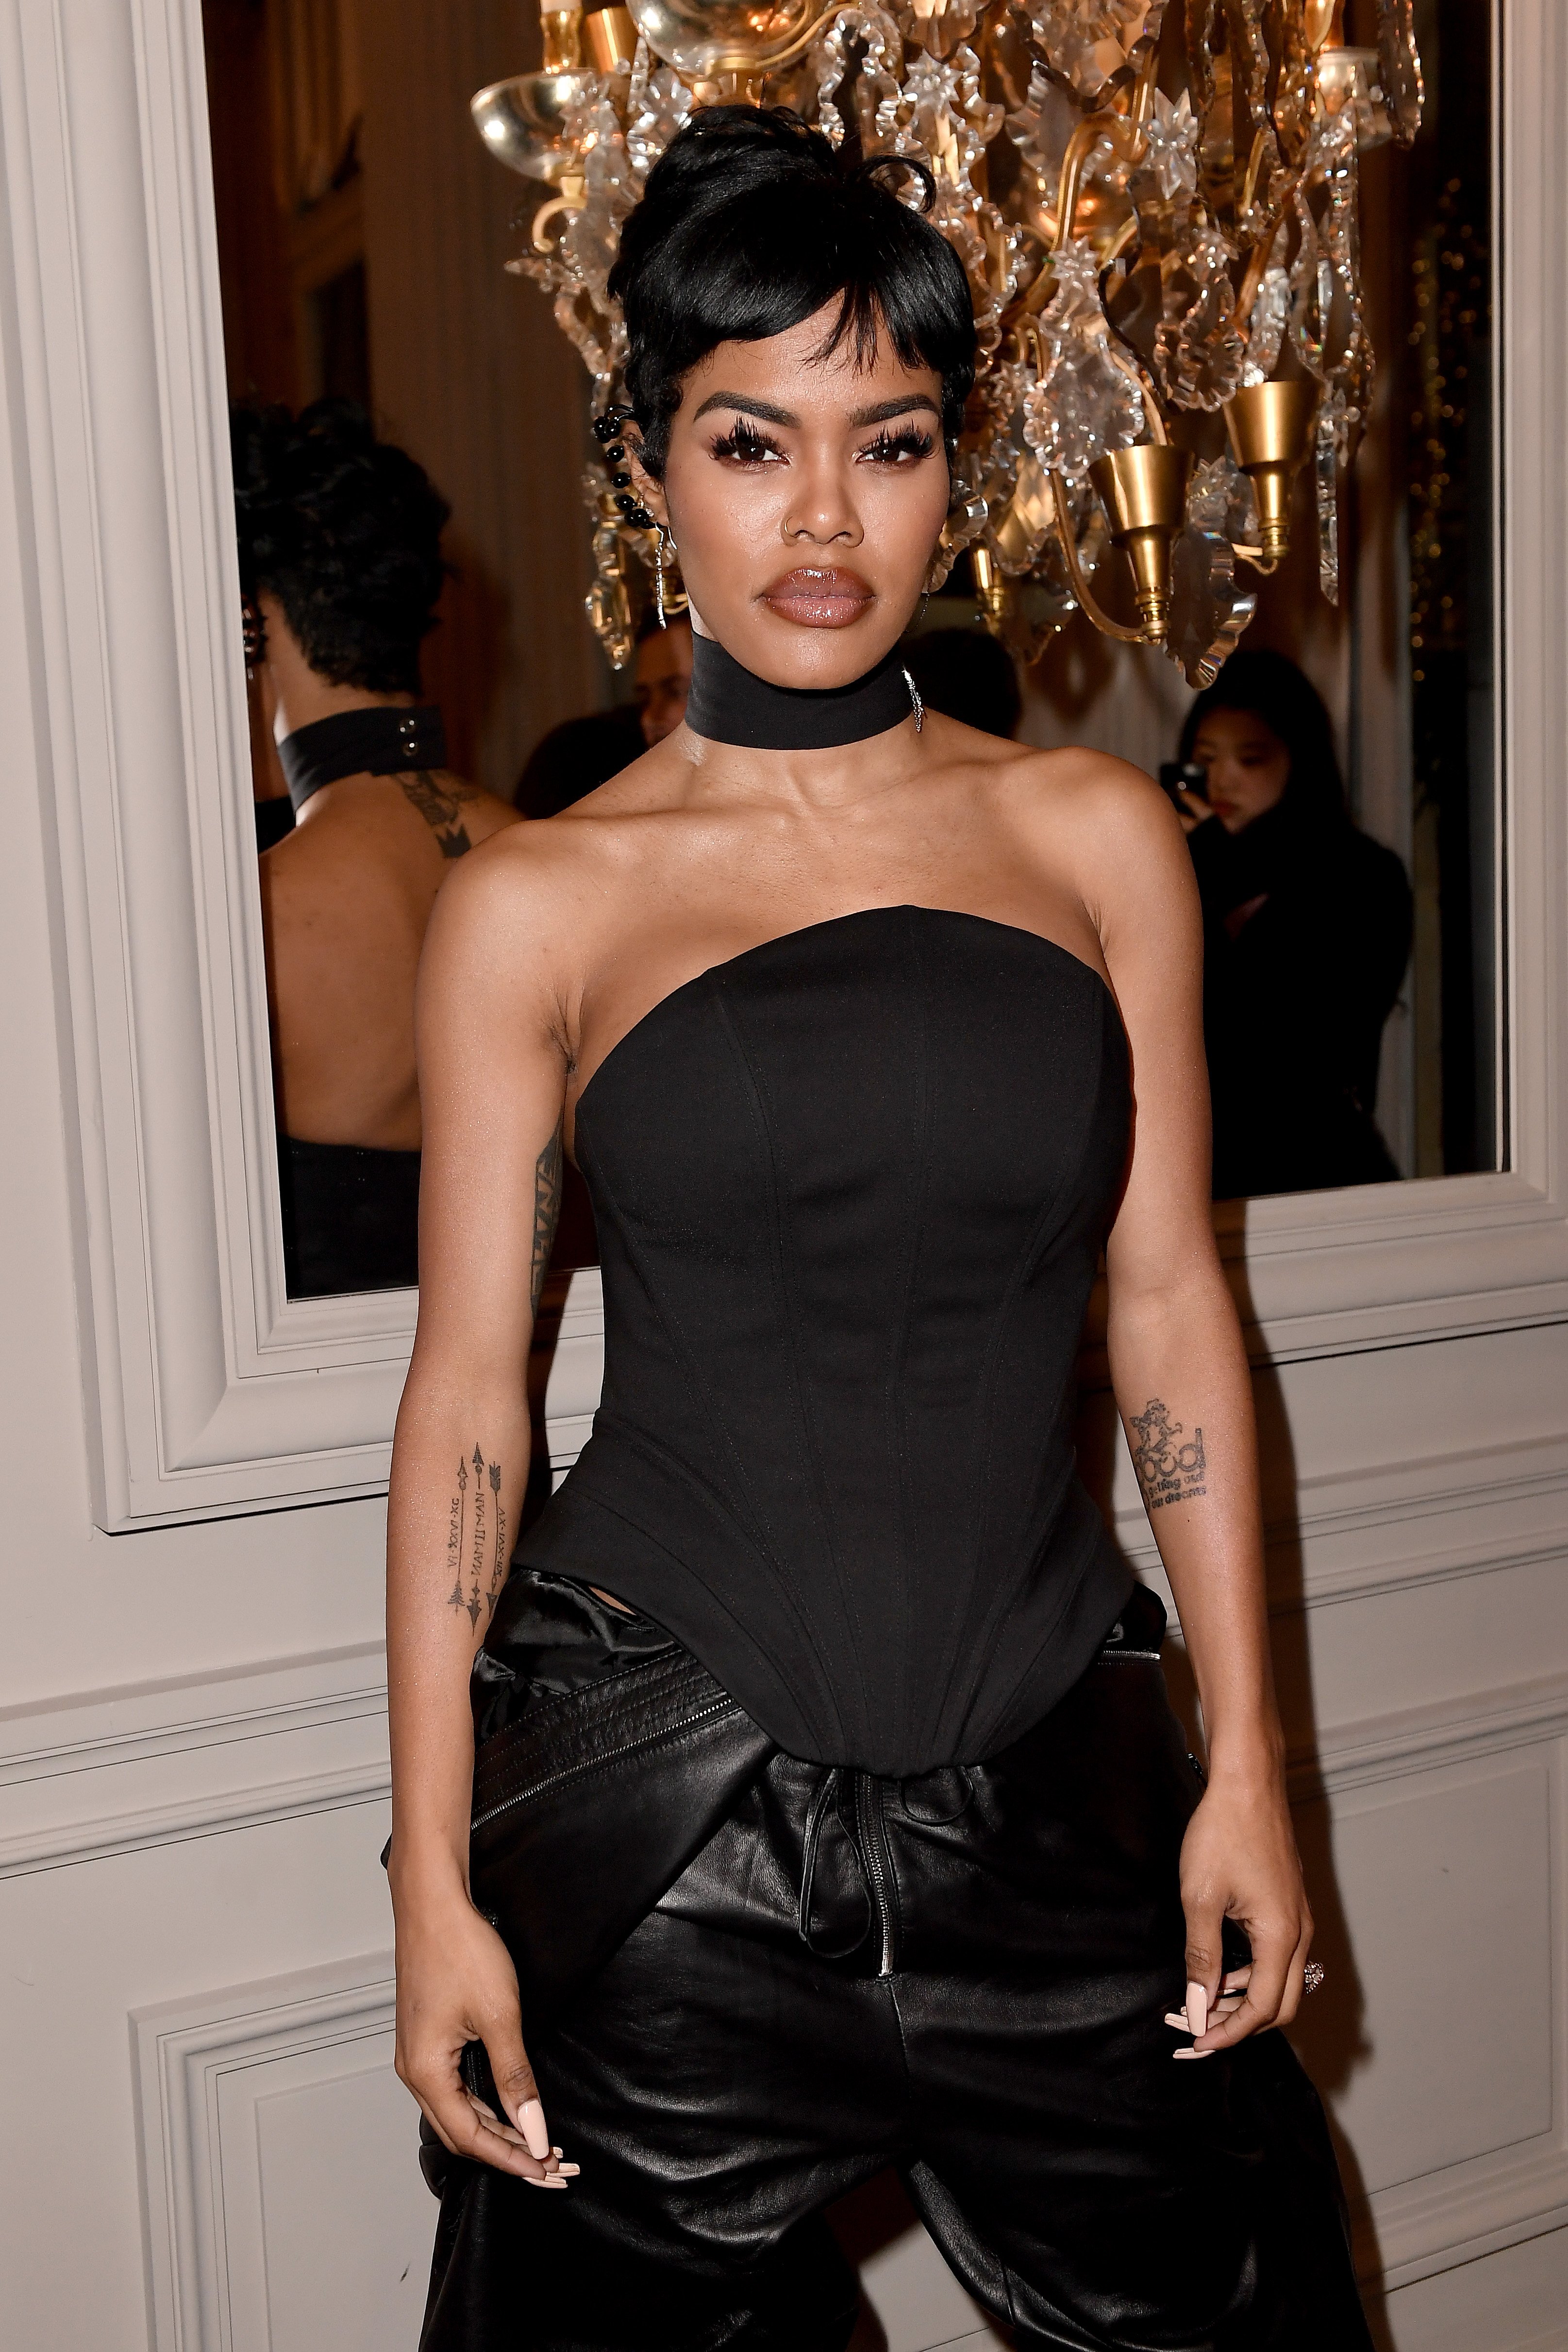 Teyana Taylor pictured at the Monot show during Paris Fashion Week on February 29, 2020 in Paris, France. | Source: Getty Images